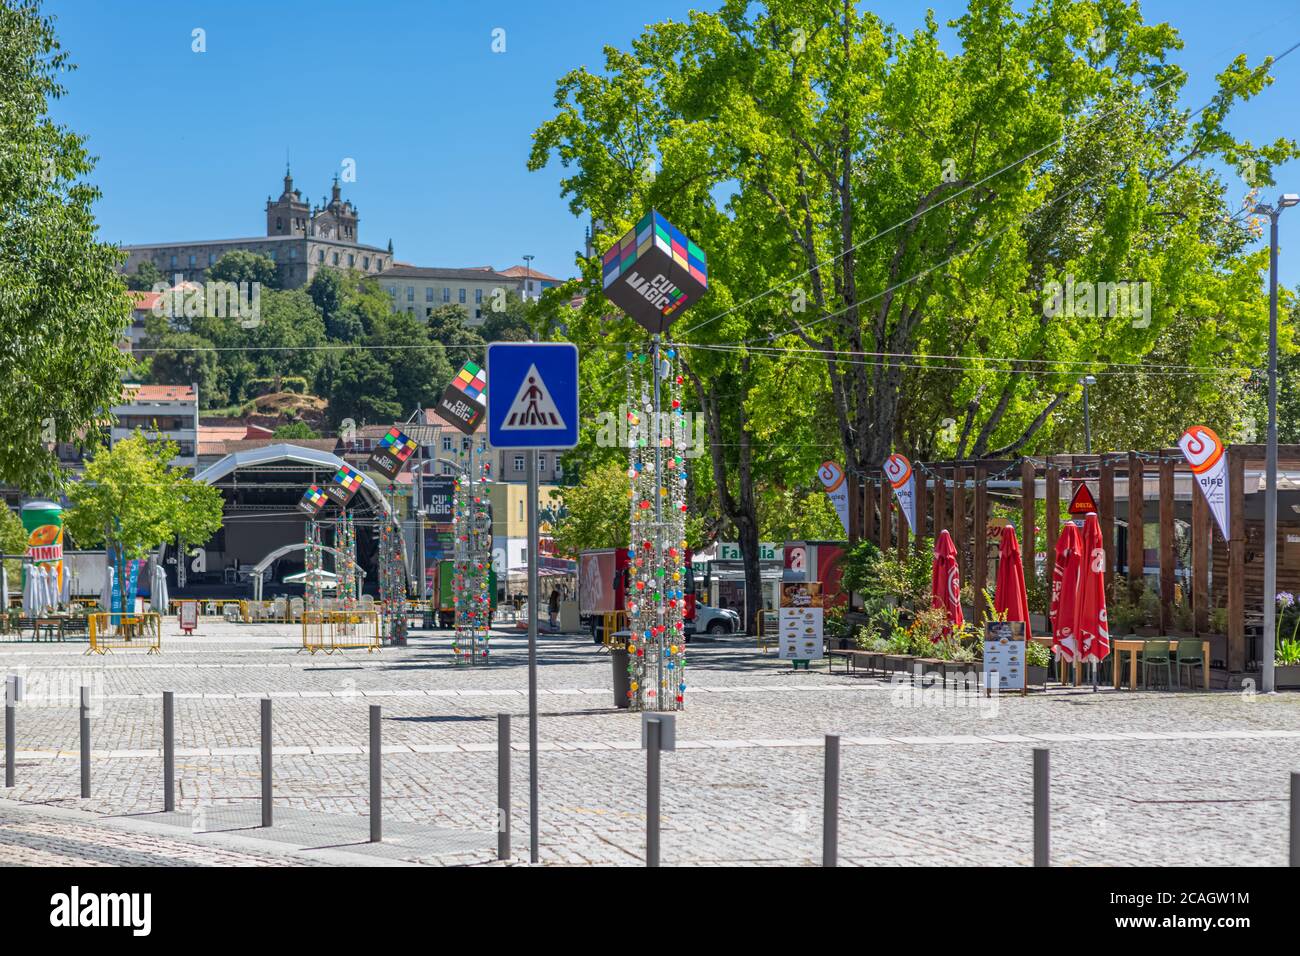 Viseu / Portugal - 07/31/2020 : View at the Viseu city downtown, with the magic cube event, and Cathedral of Viseu and Church of Mercy on top Stock Photo